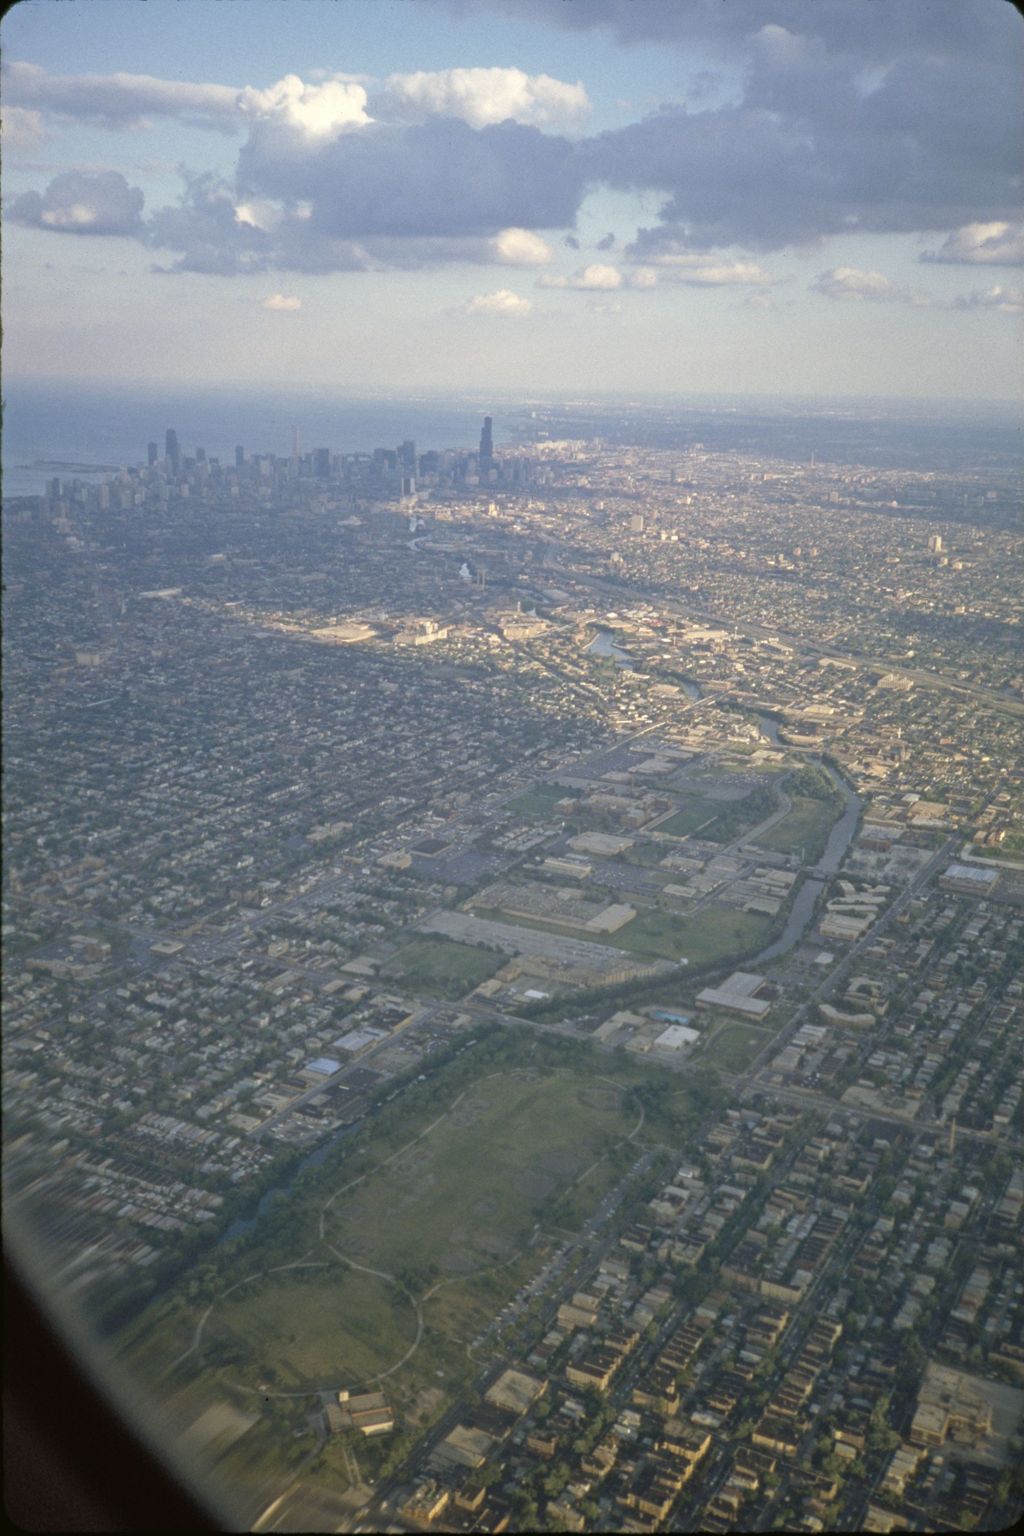 Miniature of North Branch of the Chicago River from the air